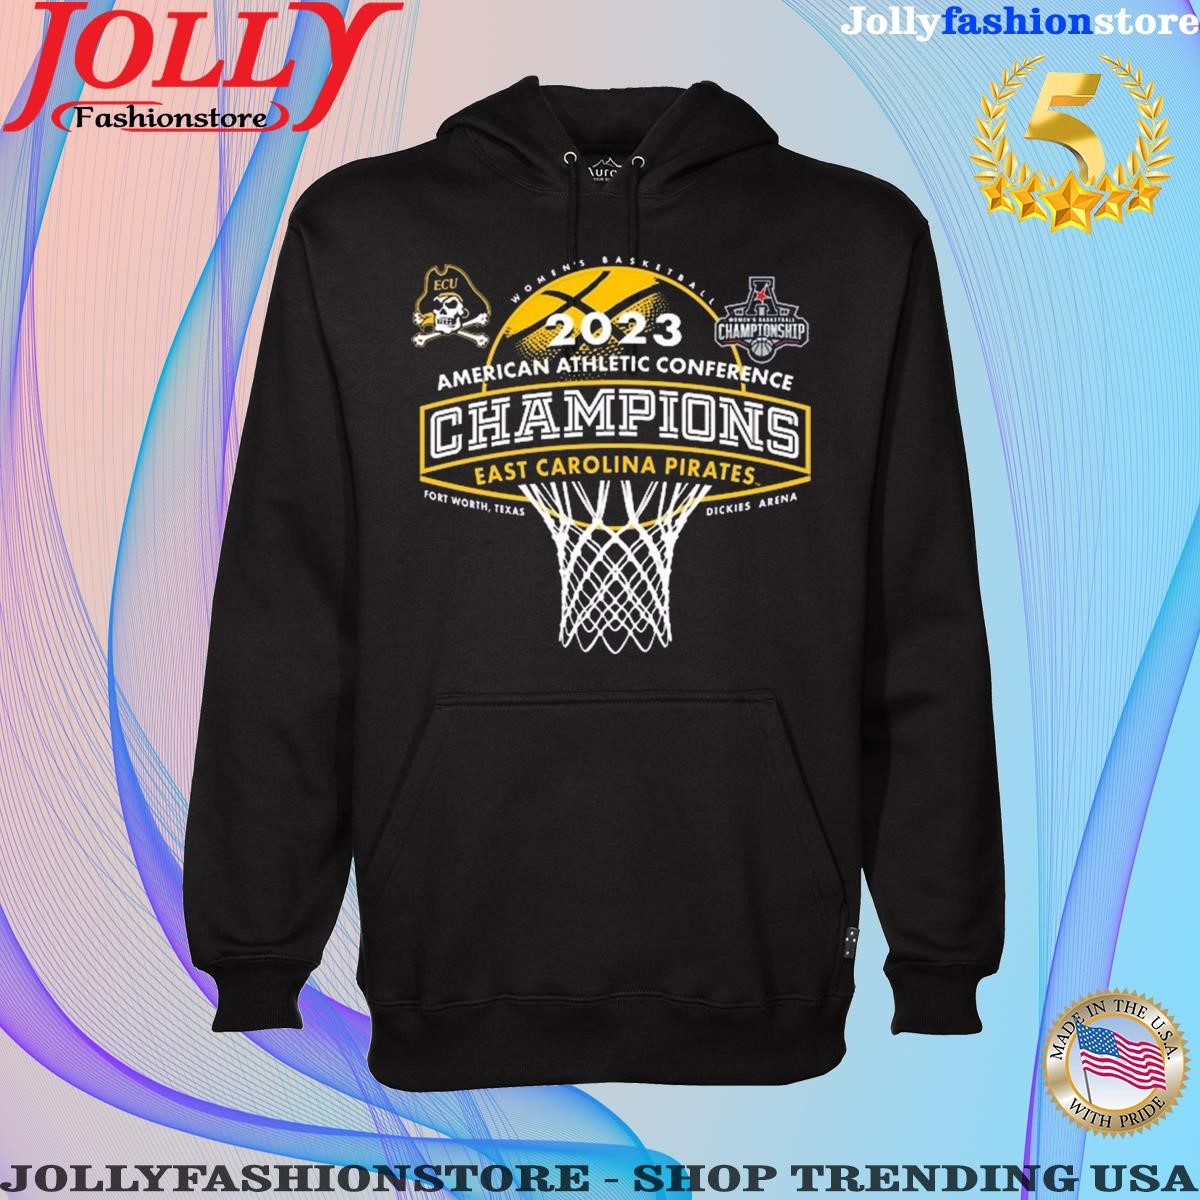 Ecu pirates women's basketball American athletic conference champions east carolina pirates Hoodie shirt.png